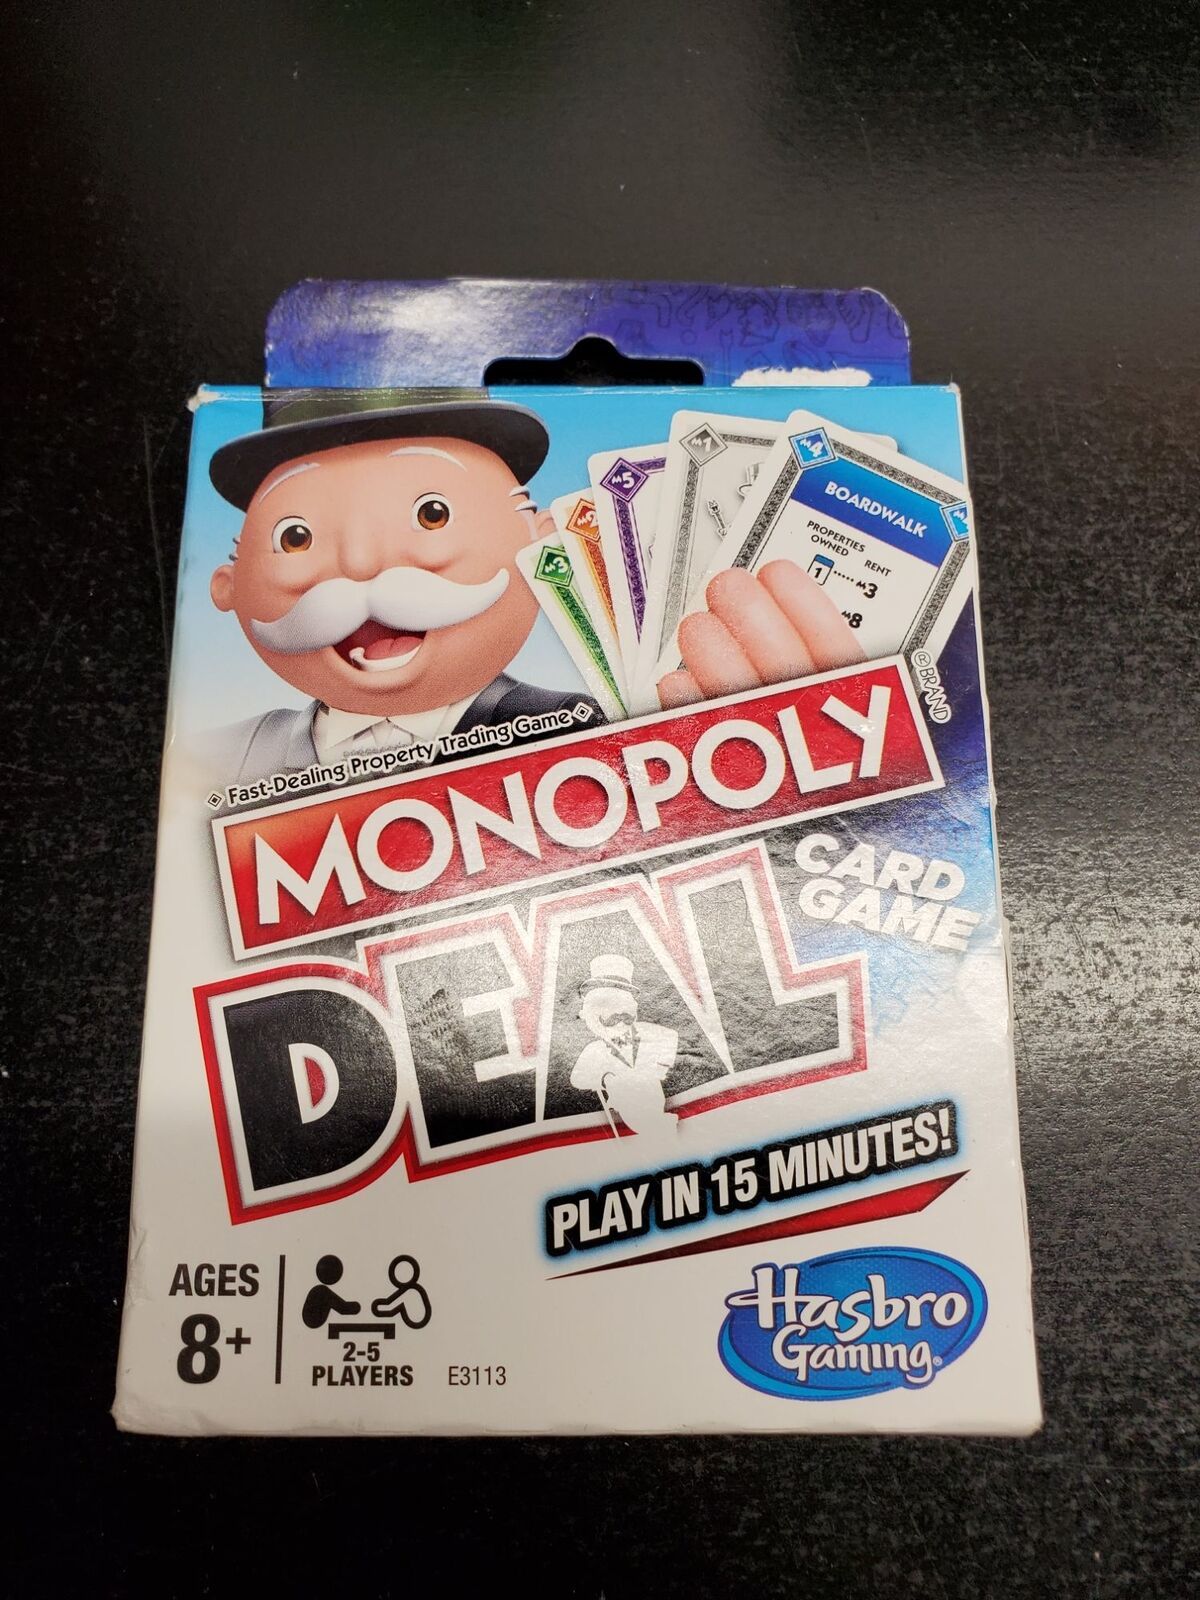 Primary image for Hasbro Gaming Monopoly Deal Card Game